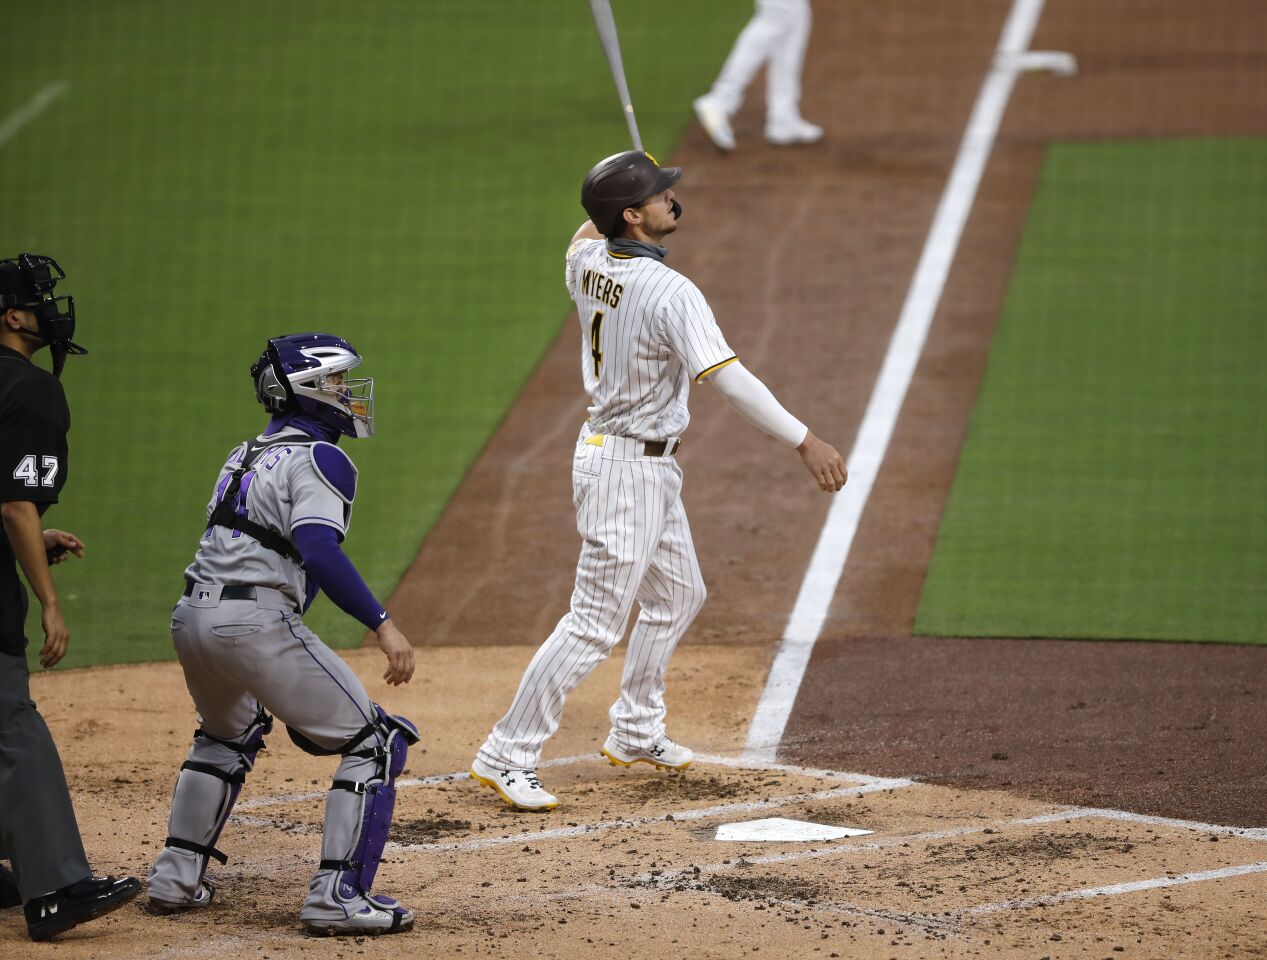 San Diego Padres Wil Myers hits a grand slam in the 1st inning against the Colorado Rockies on Tuesday, Sept. 8, 2020.